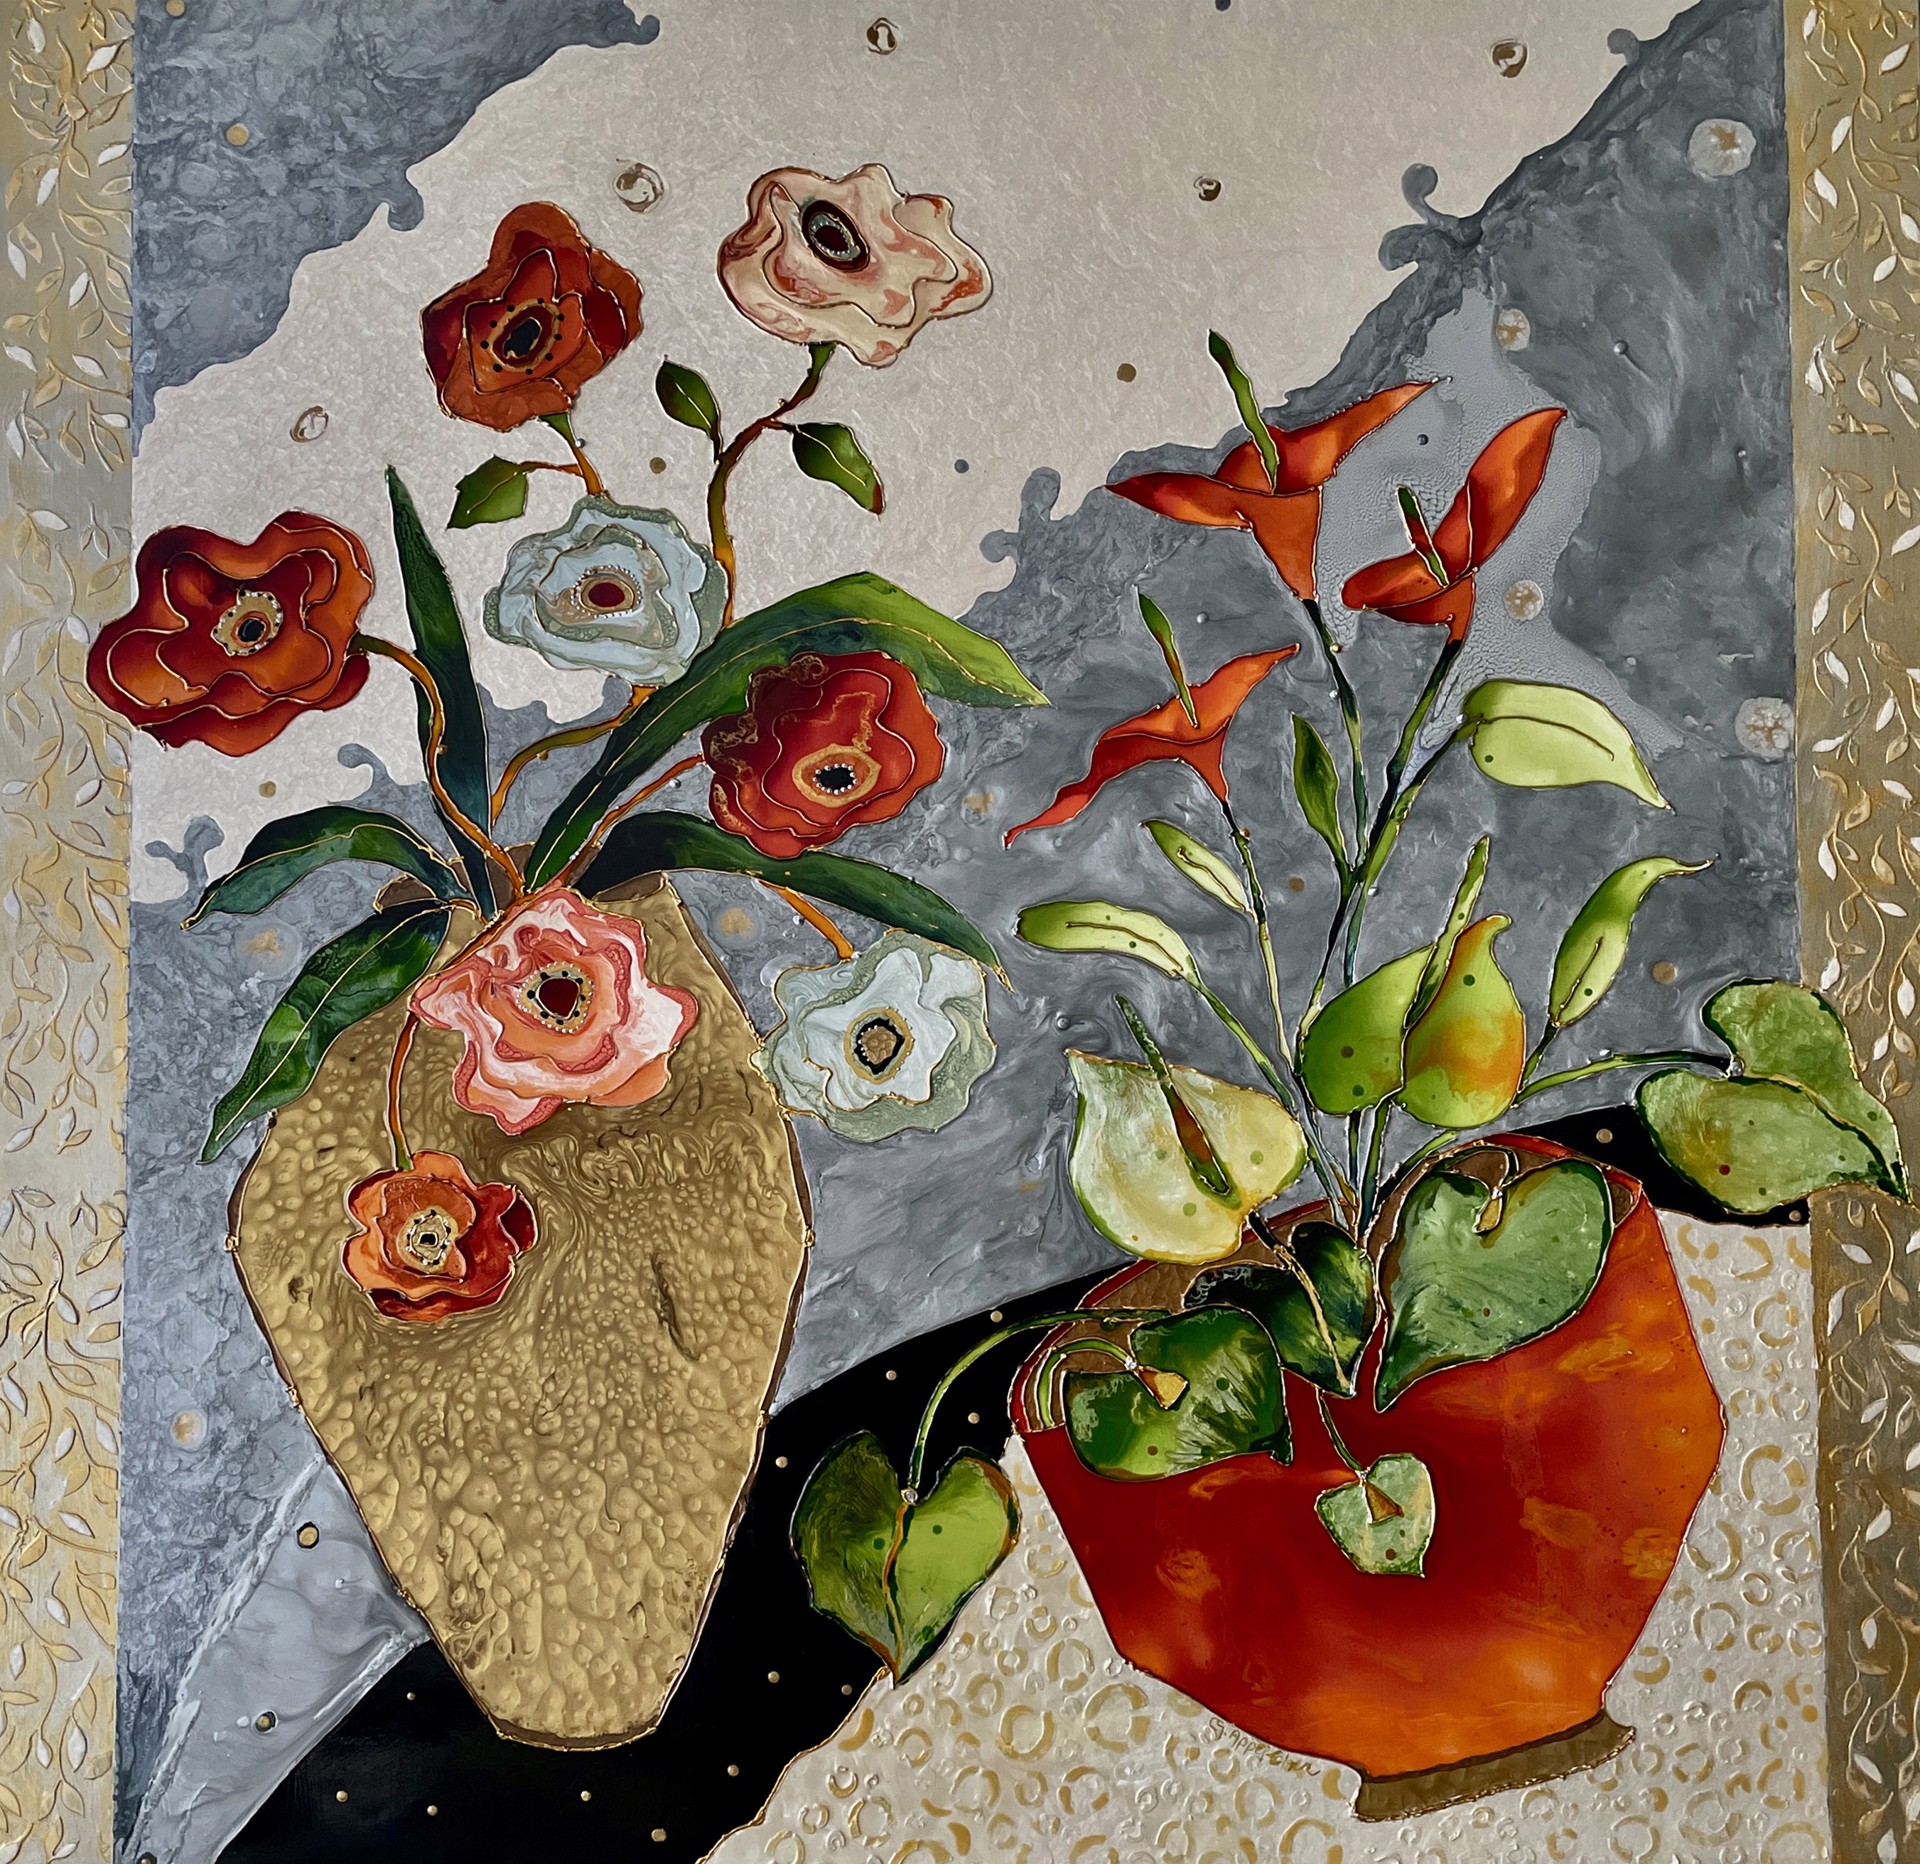 Mixed media on panel floral still life painting The Energy of Objects by Genie Appel-Cohen